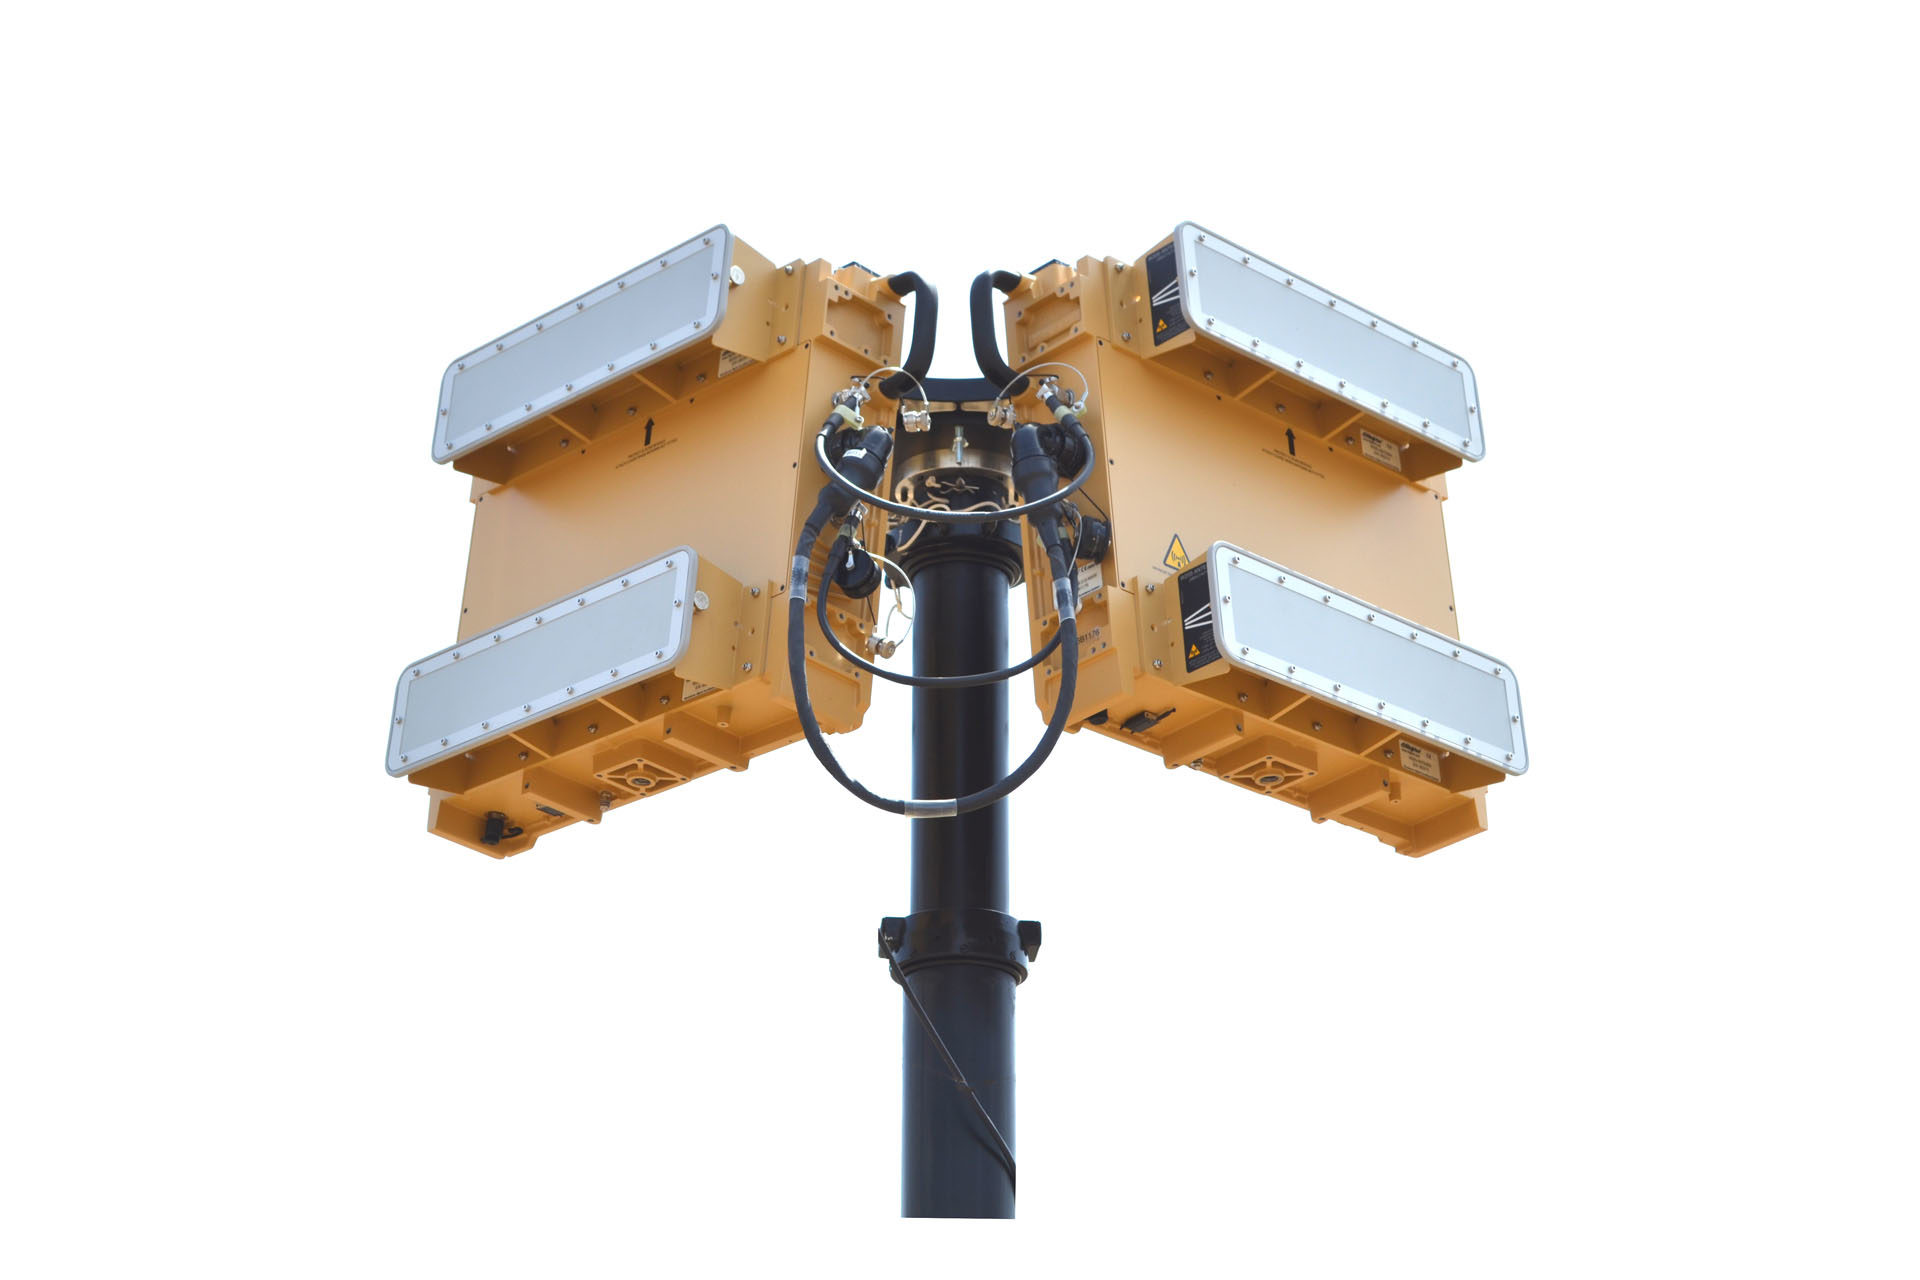 Blighter A422-HP Air Security Radar with W20S Antennas on Mast (Light Stone)